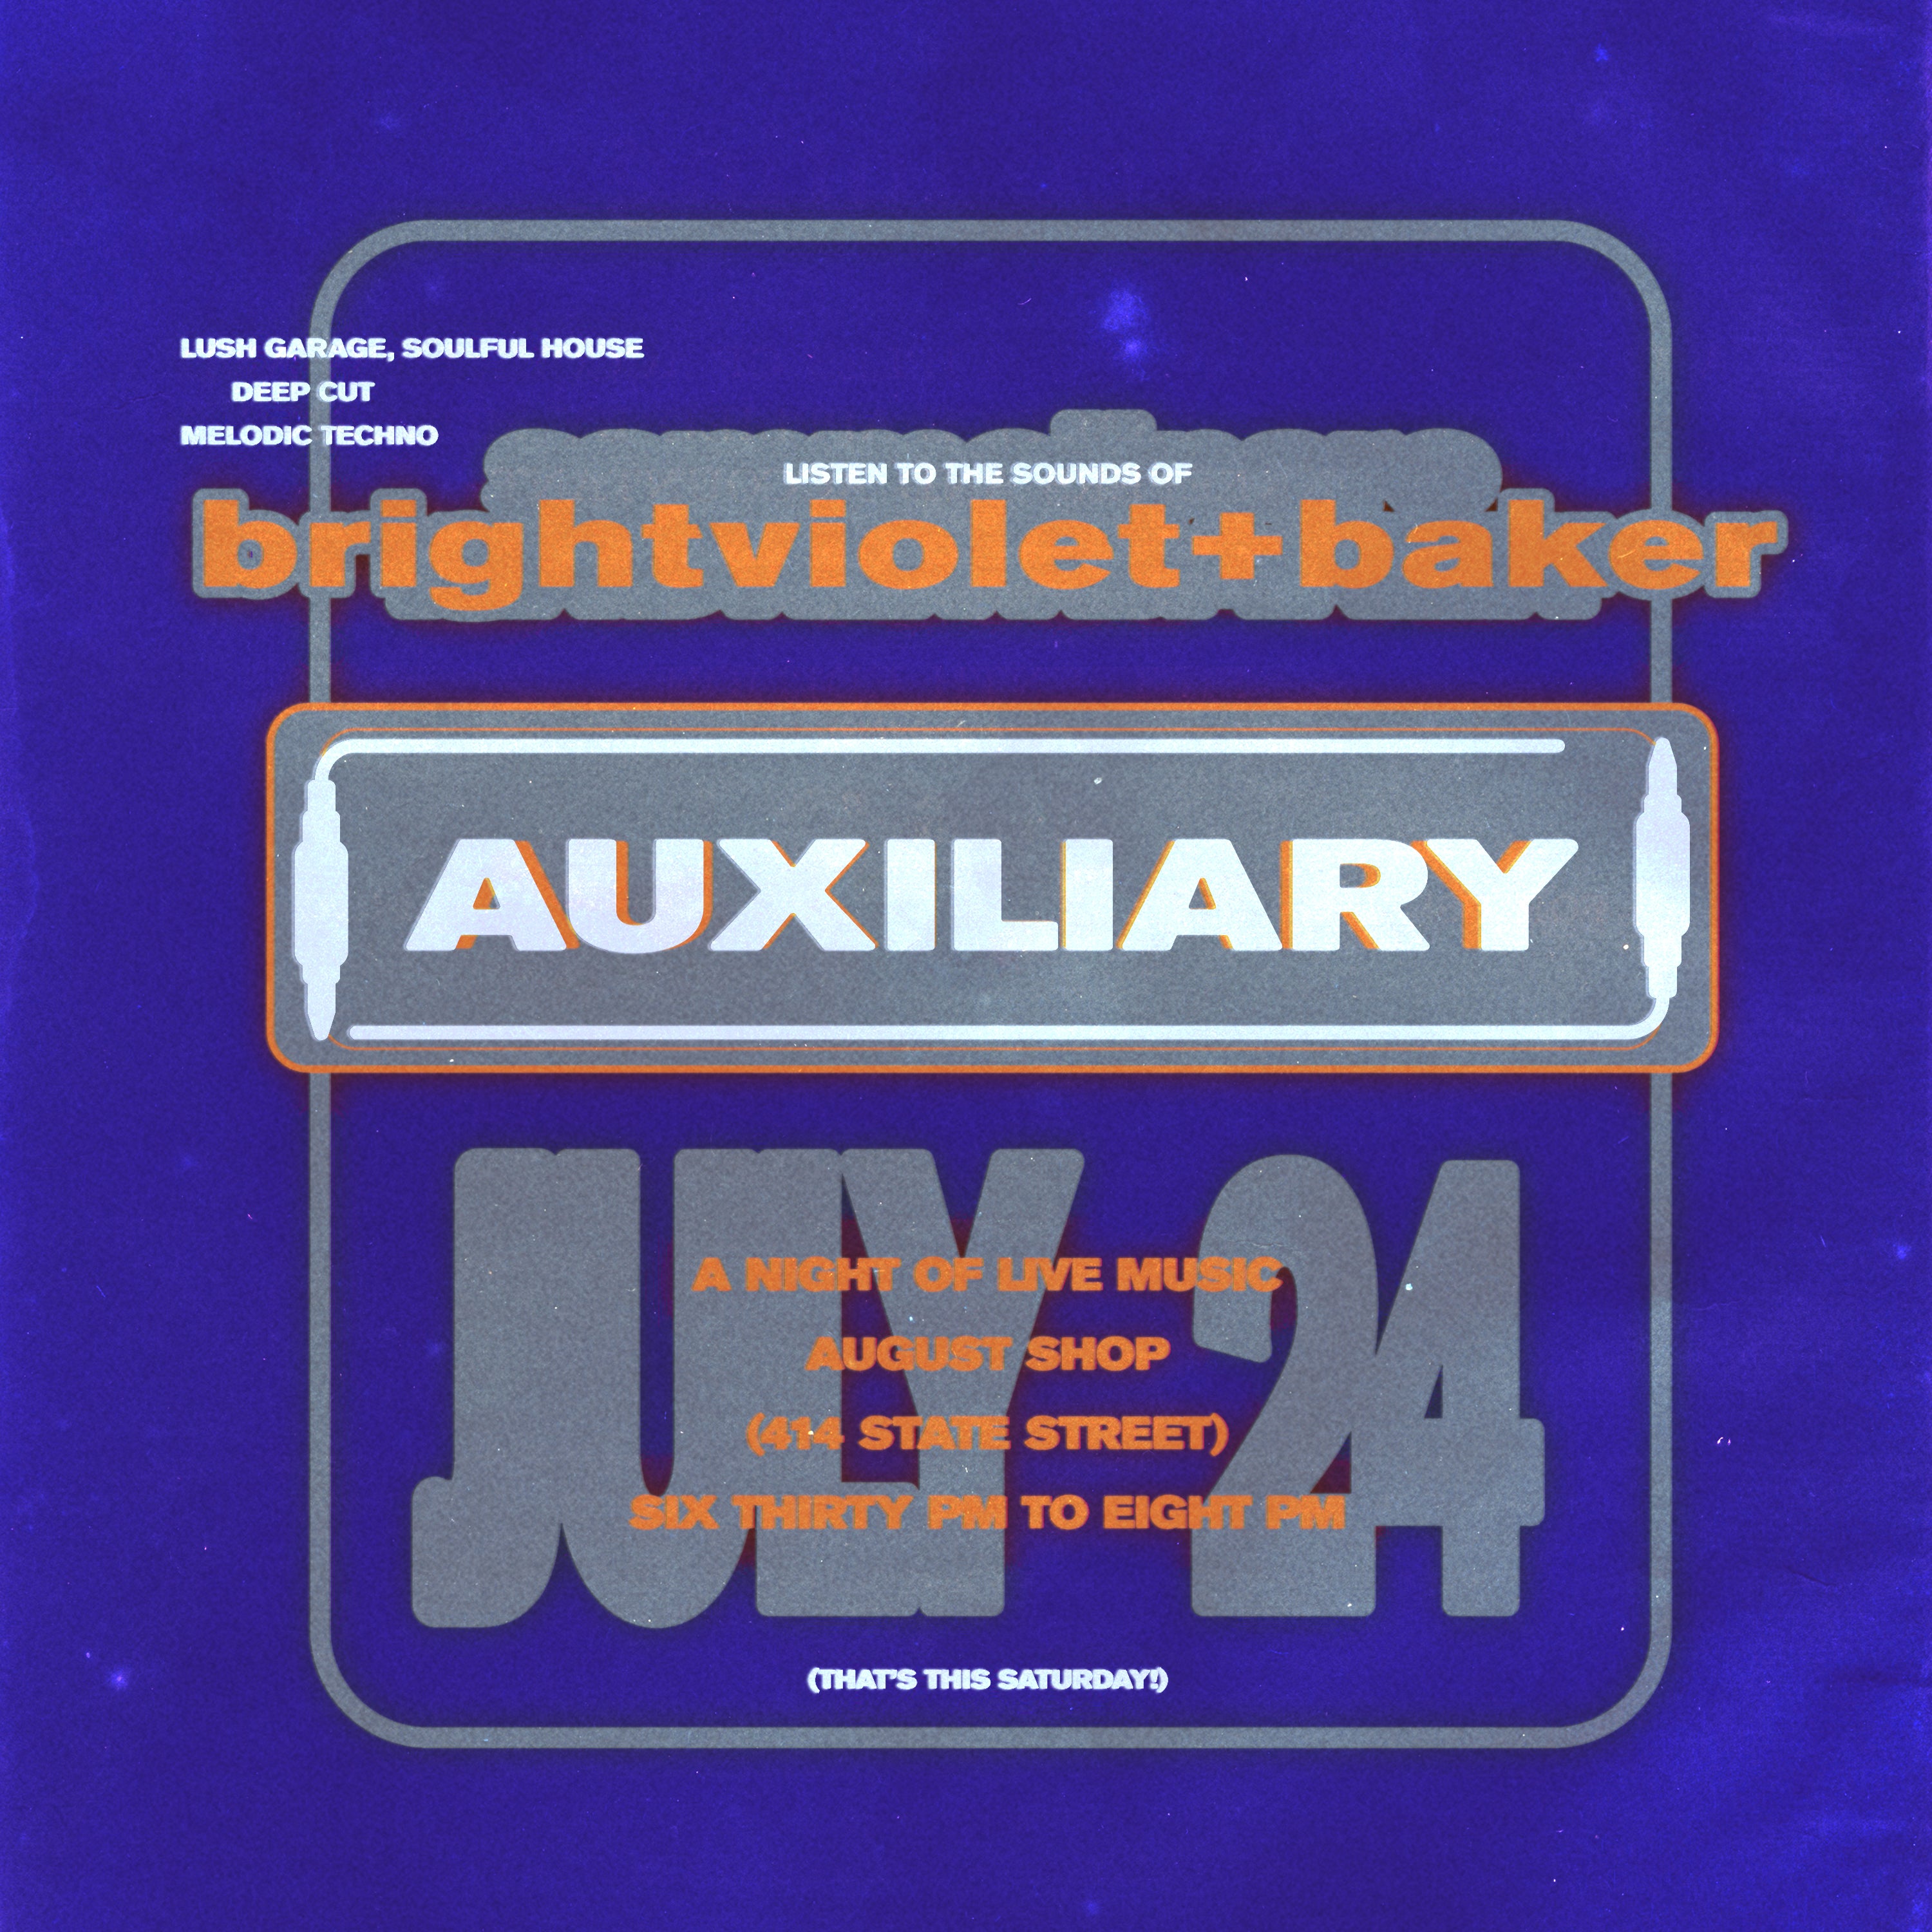 AUGUST AUX :: AUXILIARY 002 BRIGHTVIOLET B2B BAKER